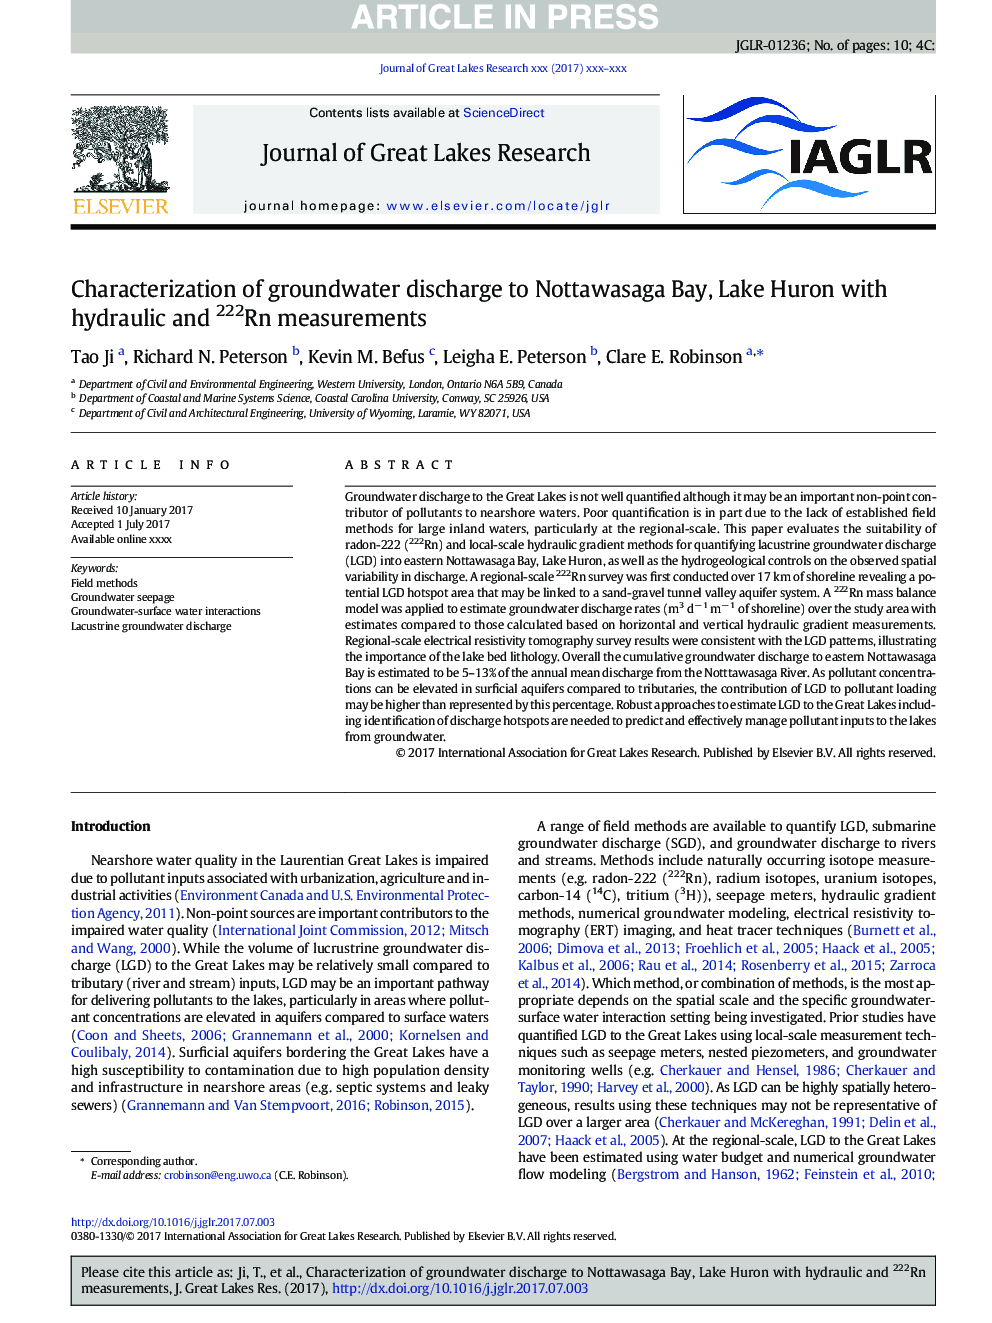 Characterization of groundwater discharge to Nottawasaga Bay, Lake Huron with hydraulic and 222Rn measurements